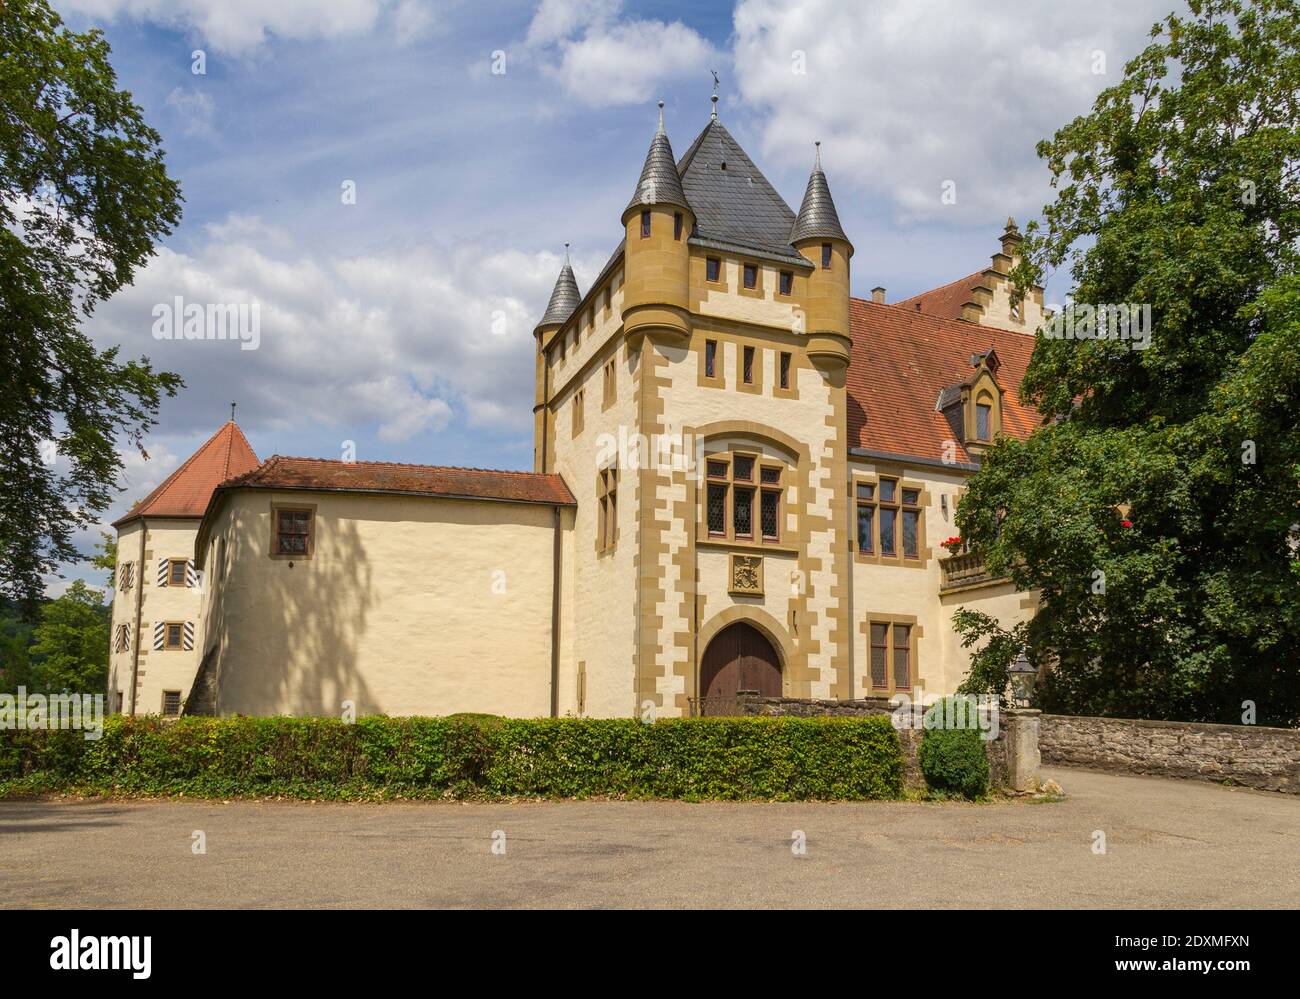 The Jagsthausen castle located in Southern Germany at summer time Stock Photo